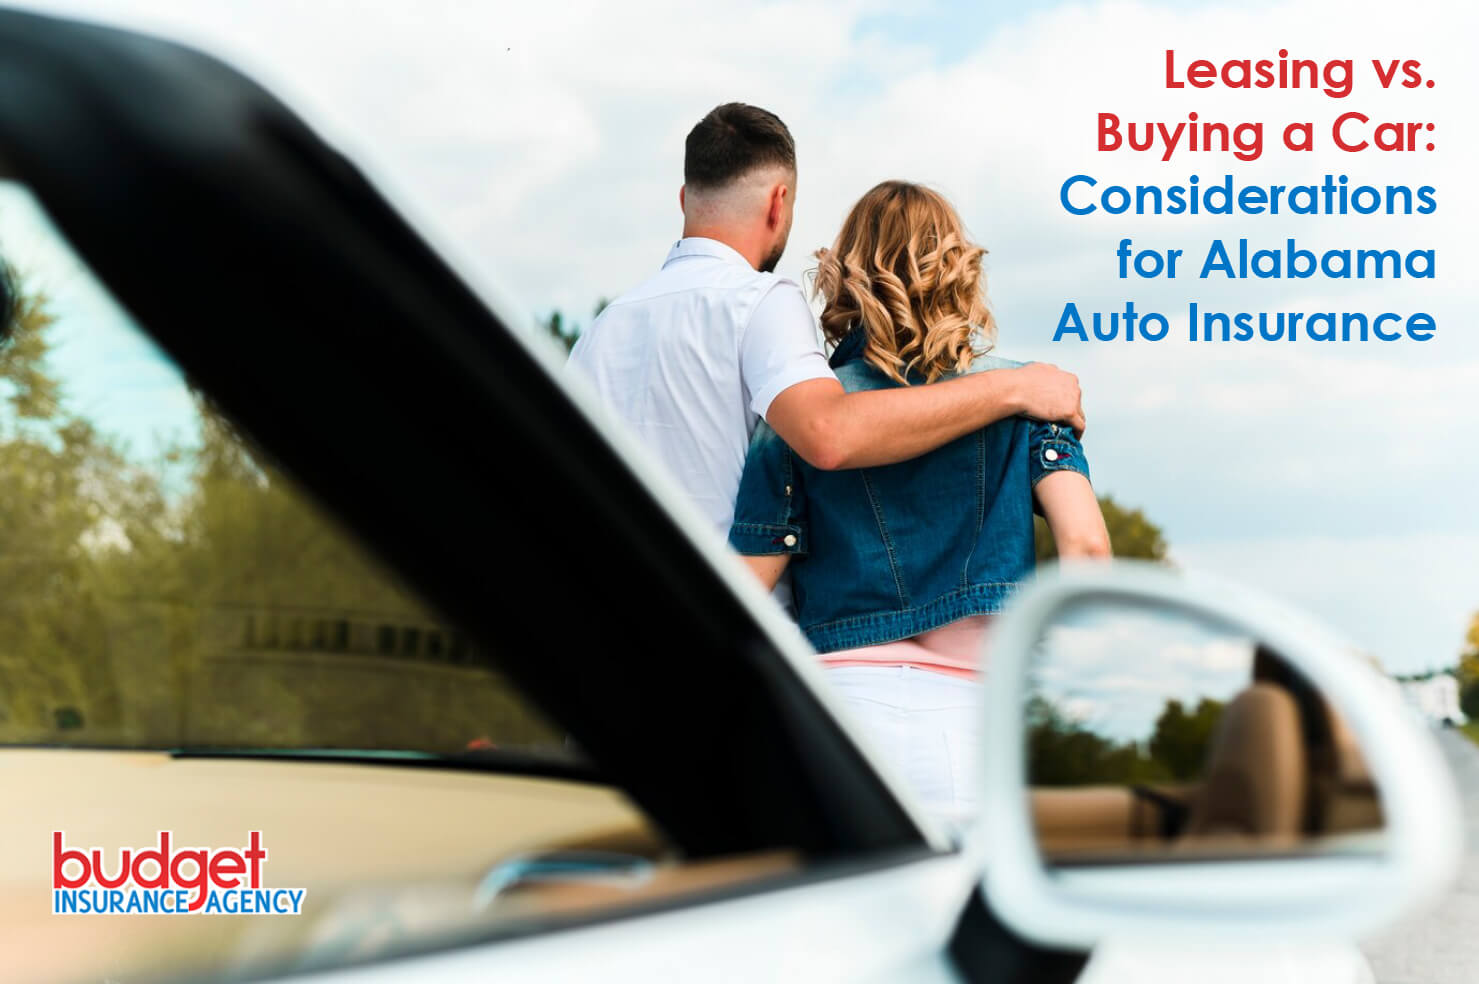 Leasing vs. Buying a Car: Considerations for Alabama Auto Insurance